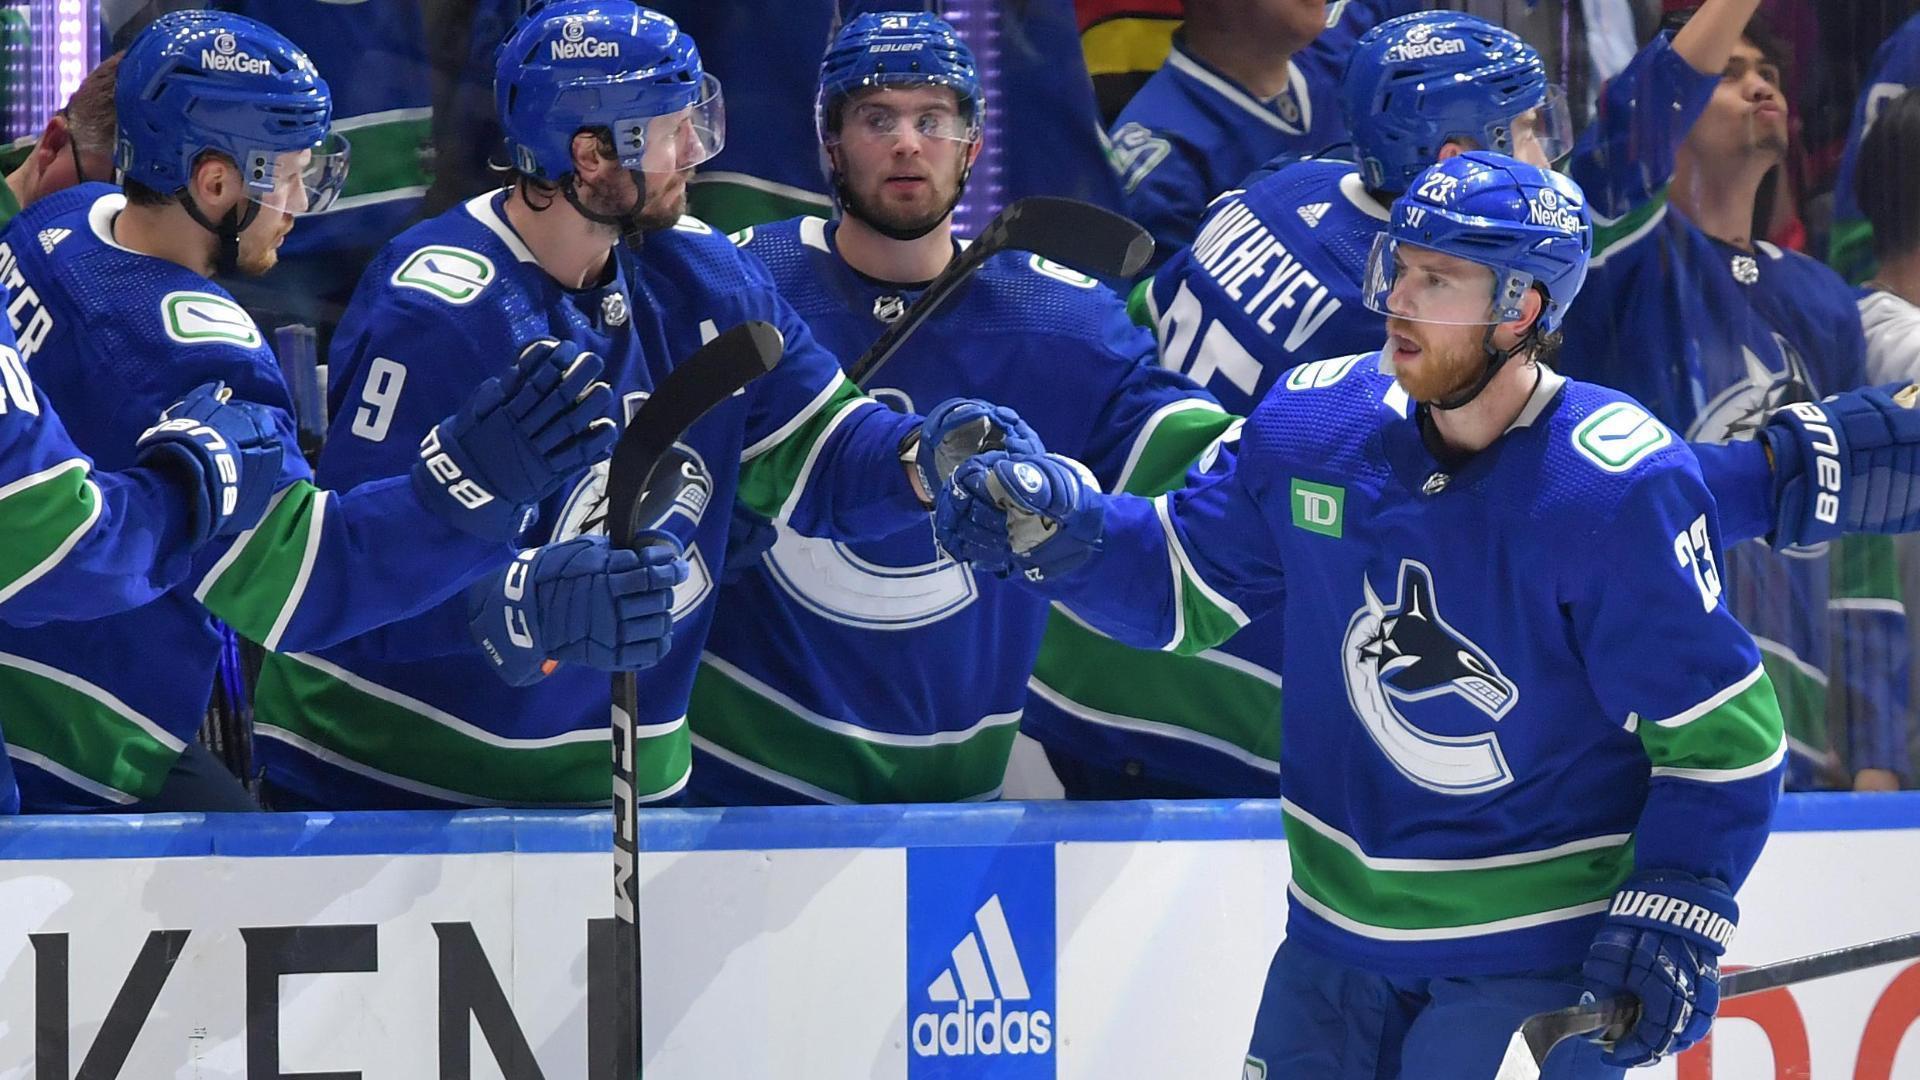 Elias Lindholm helps Canucks get one back late in 2nd period